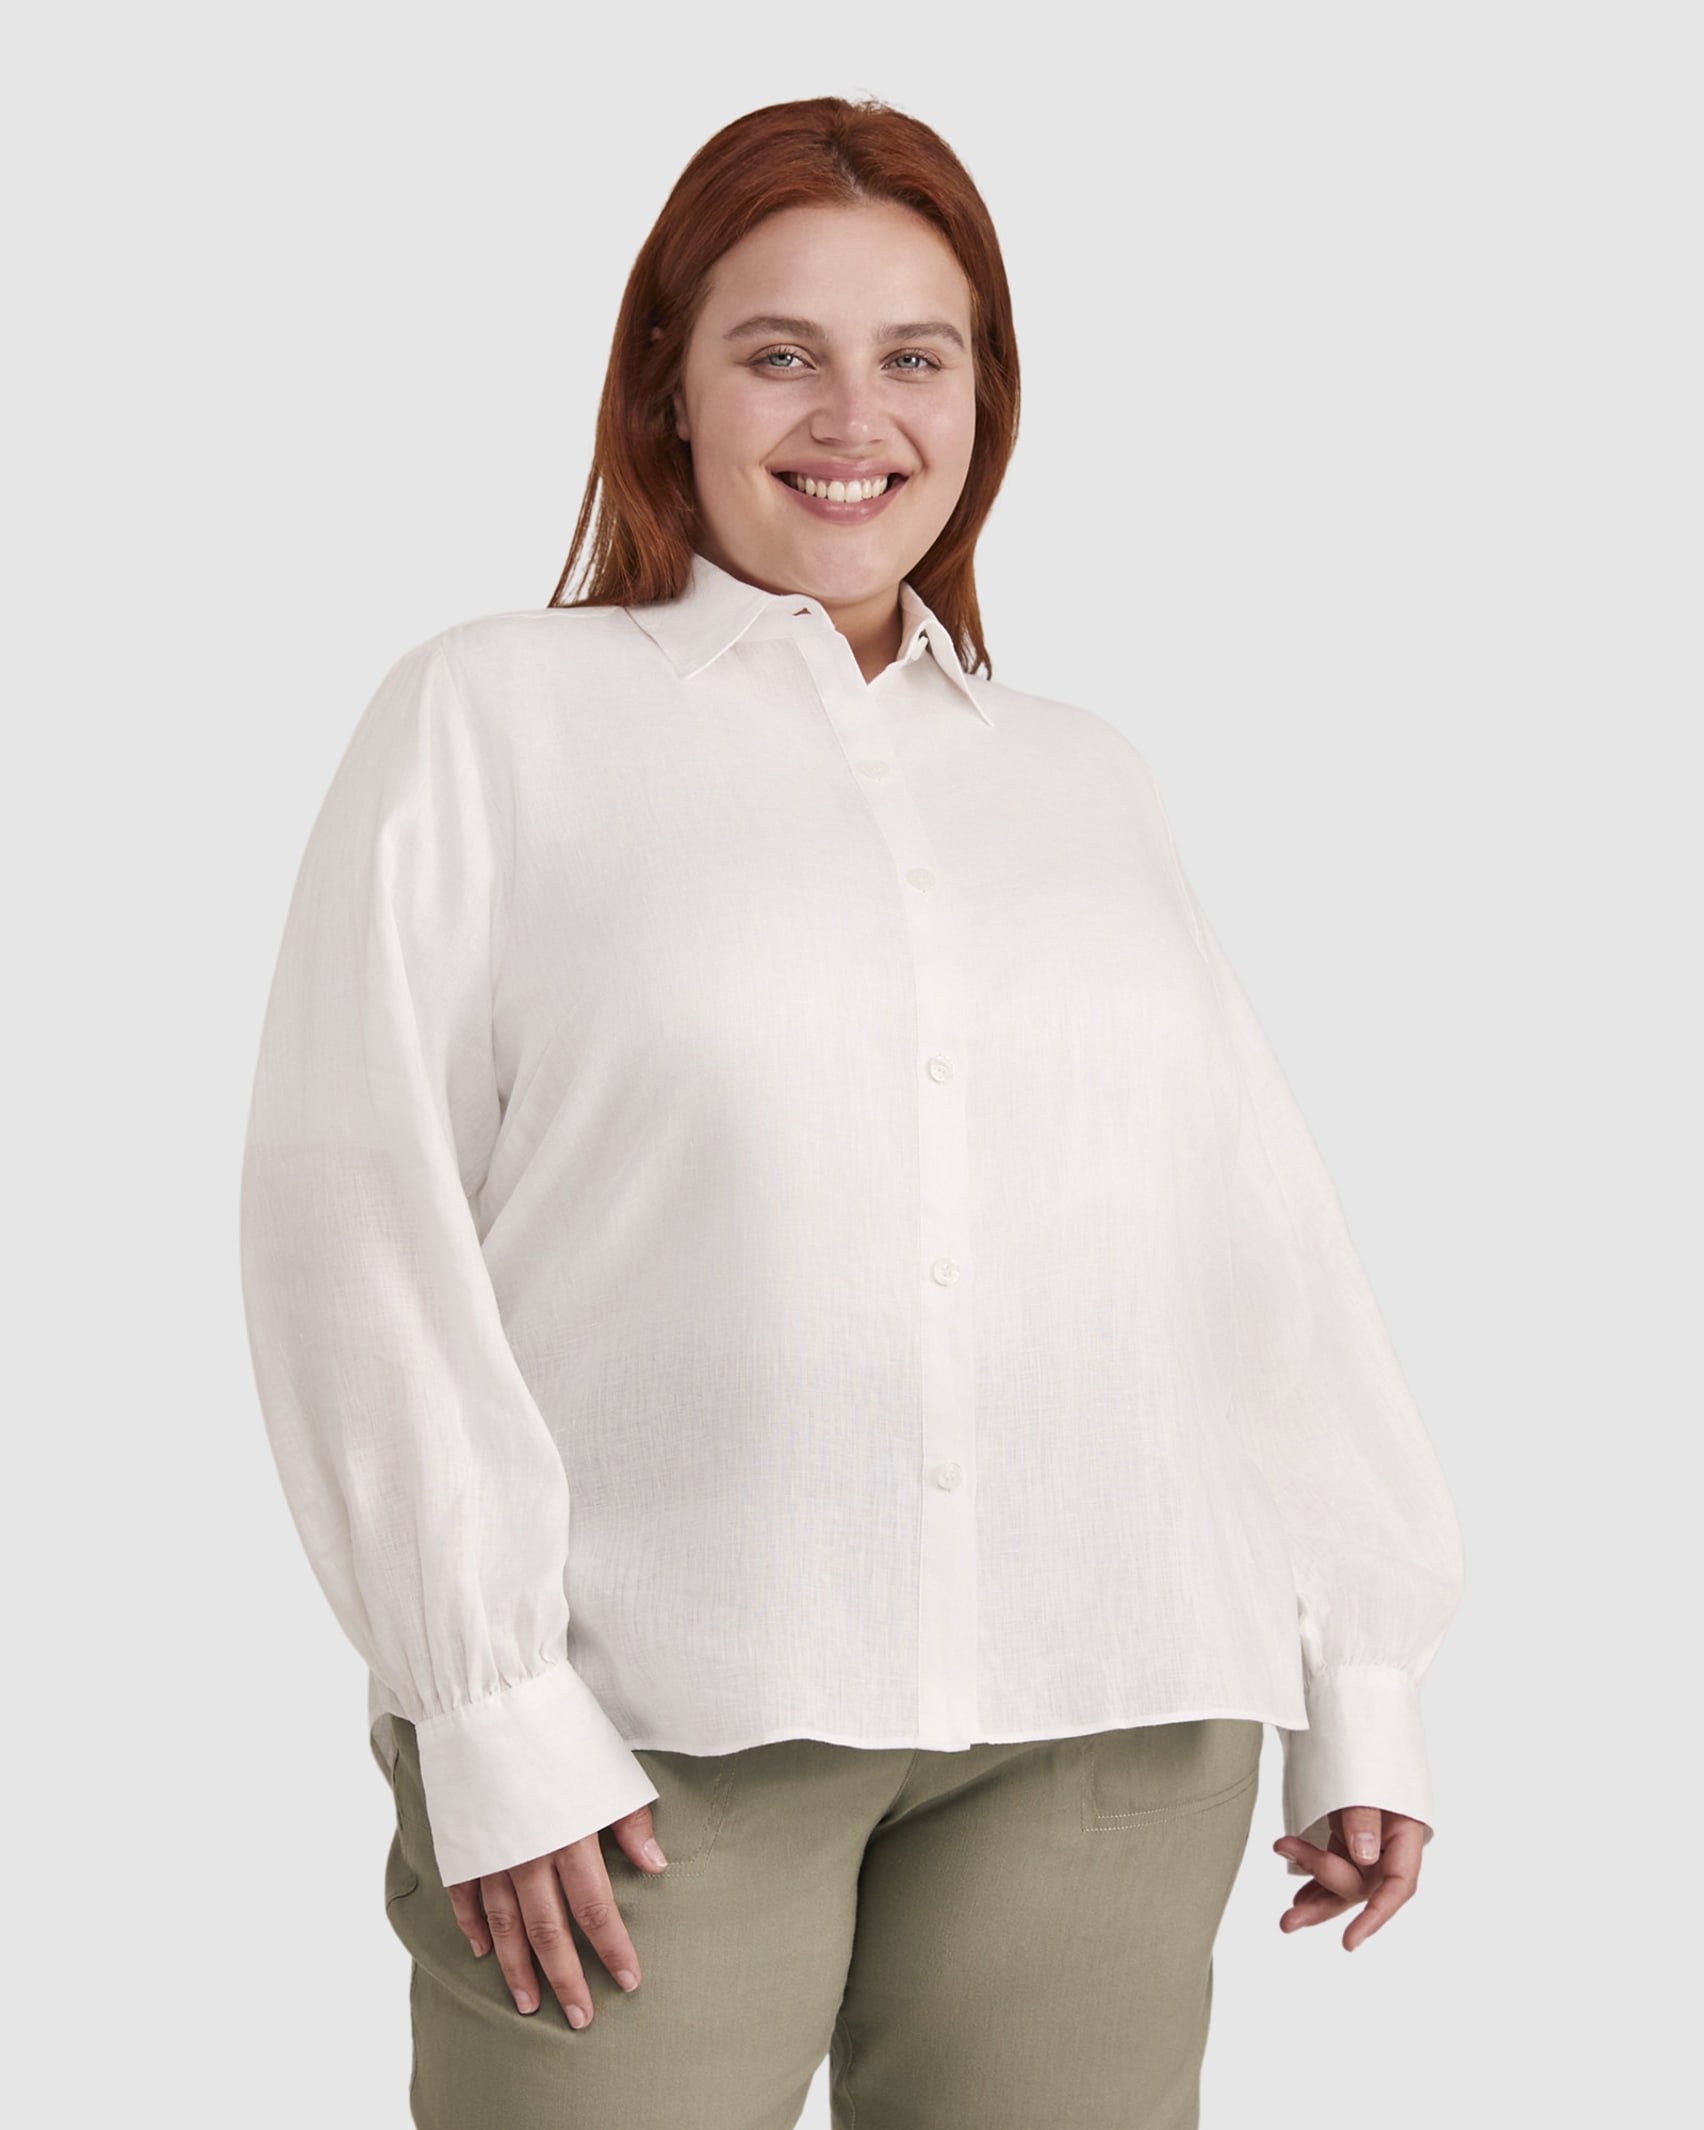 Rylie Shirt in WHITE